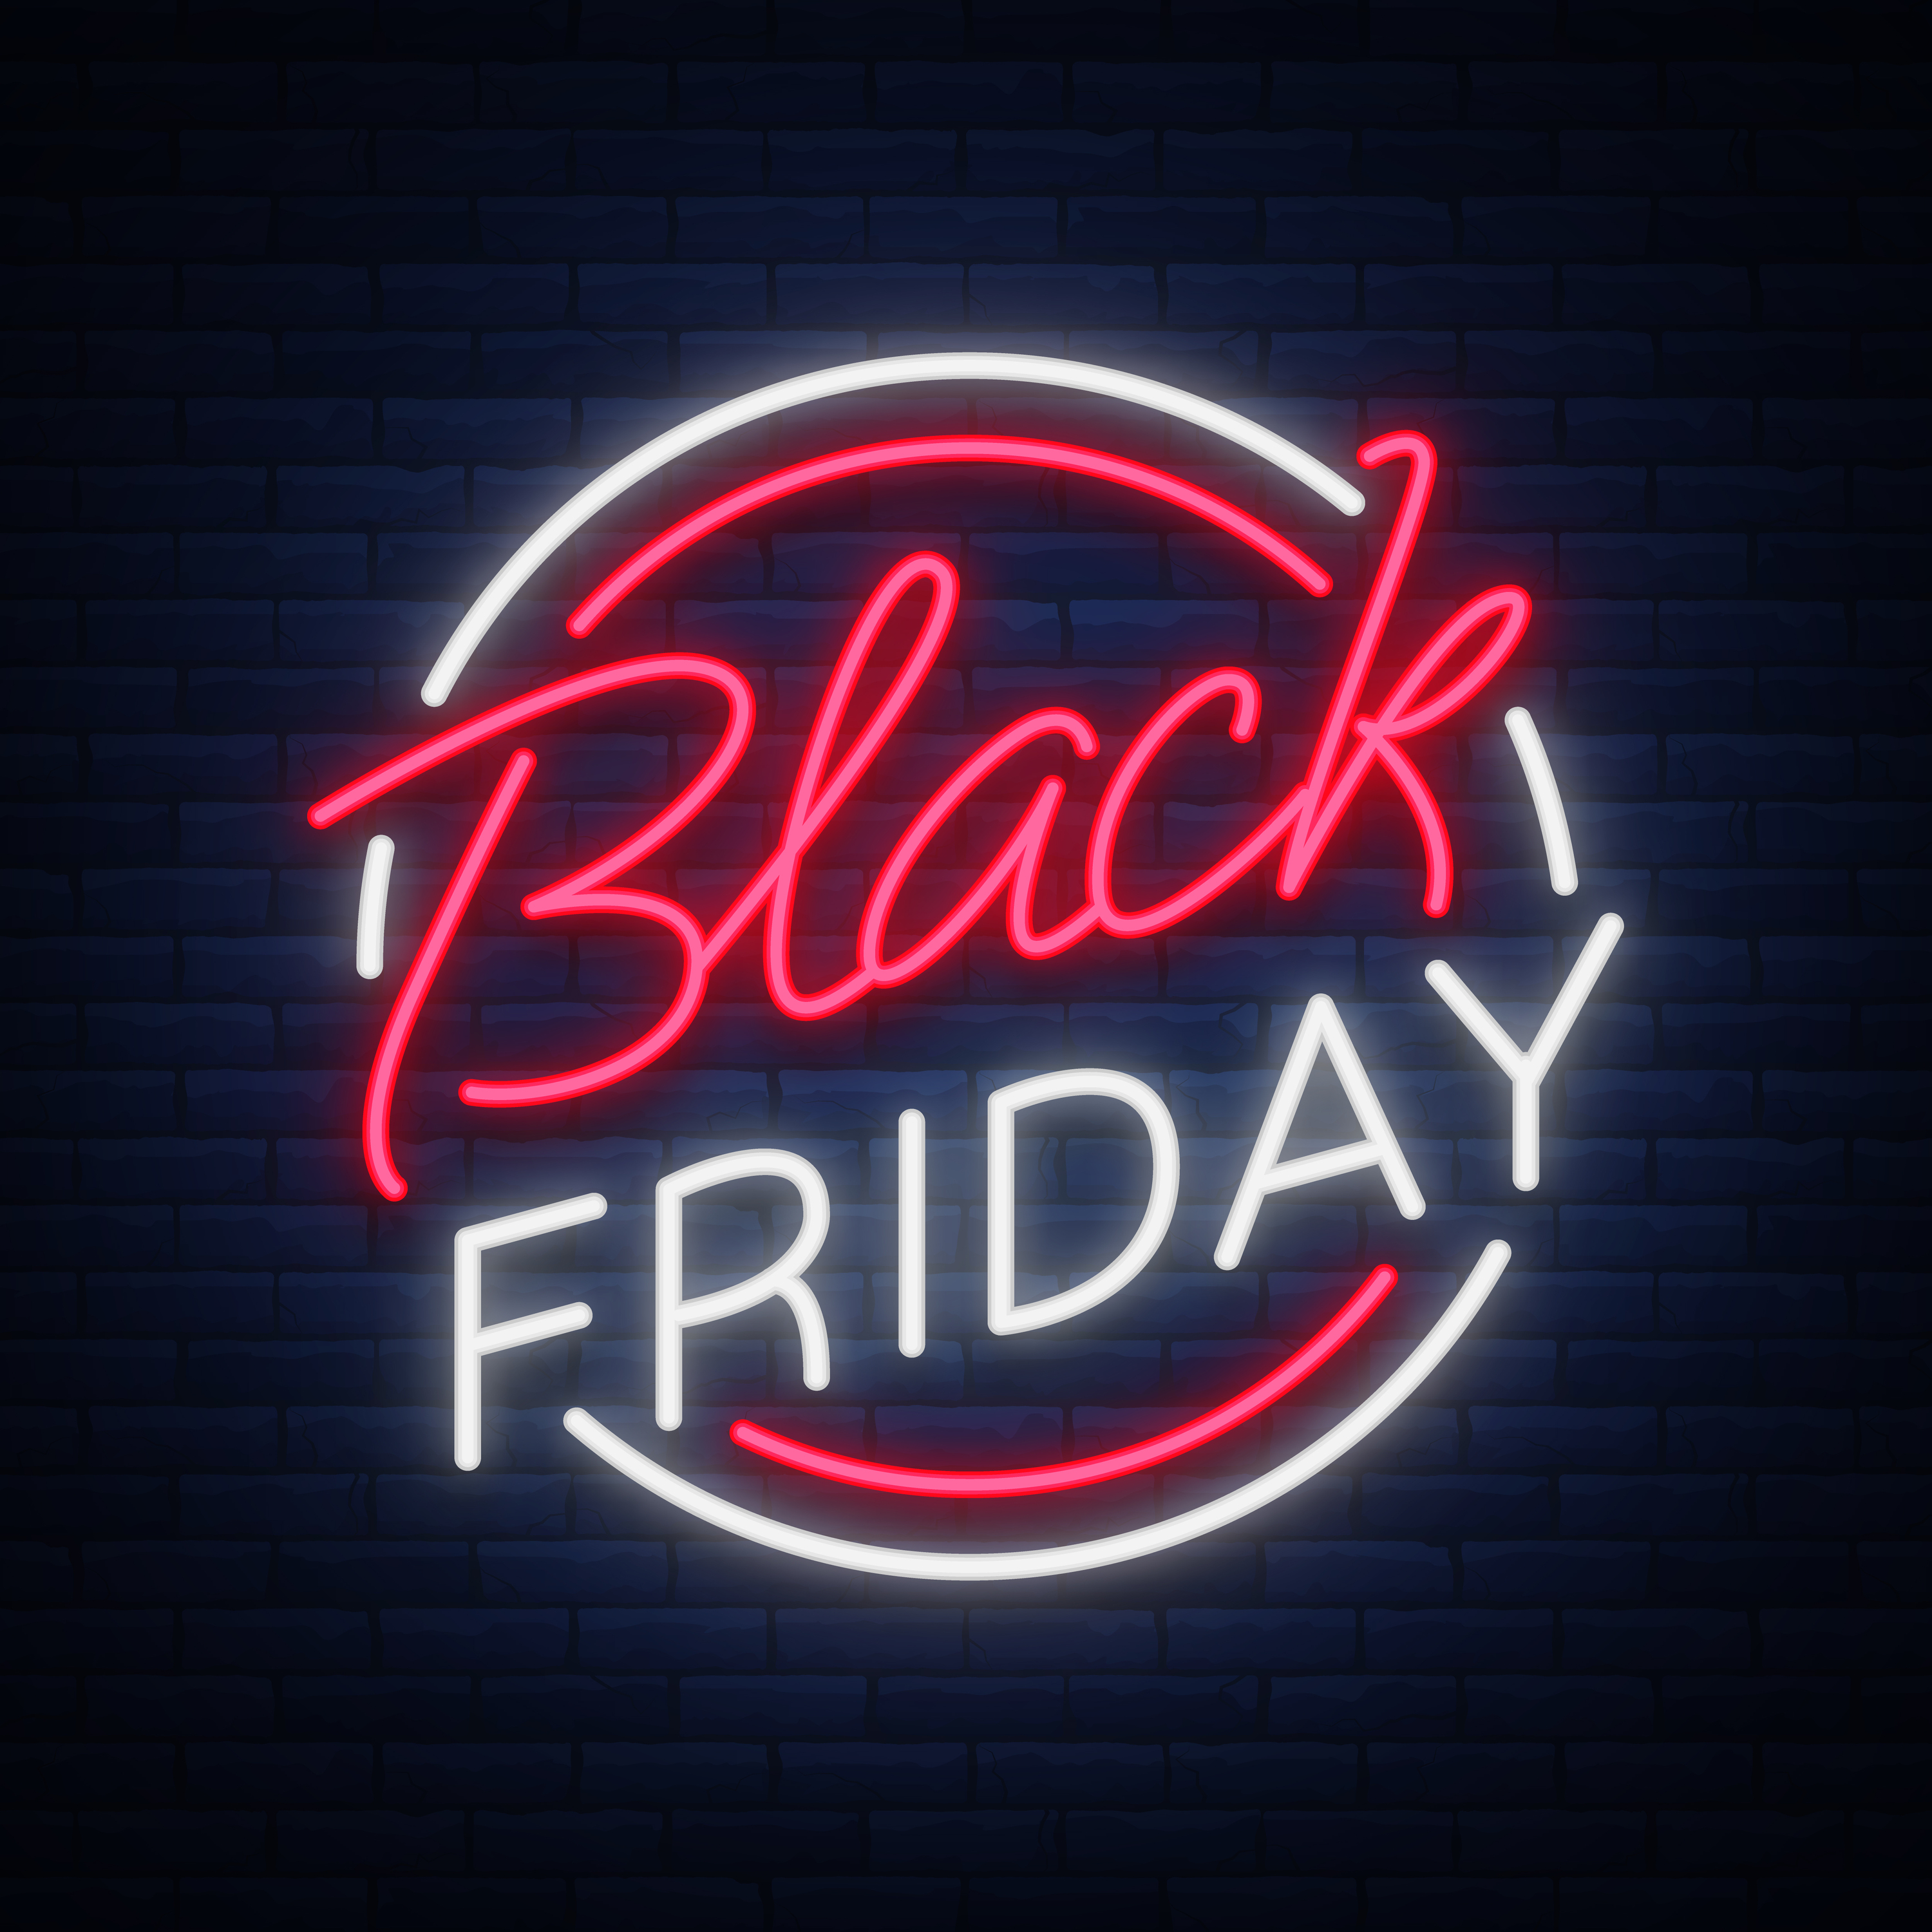 Black Friday Tip 2 Fully Maximize Amex Offers With Black Friday And Cyber Monday Deals Deals We Like